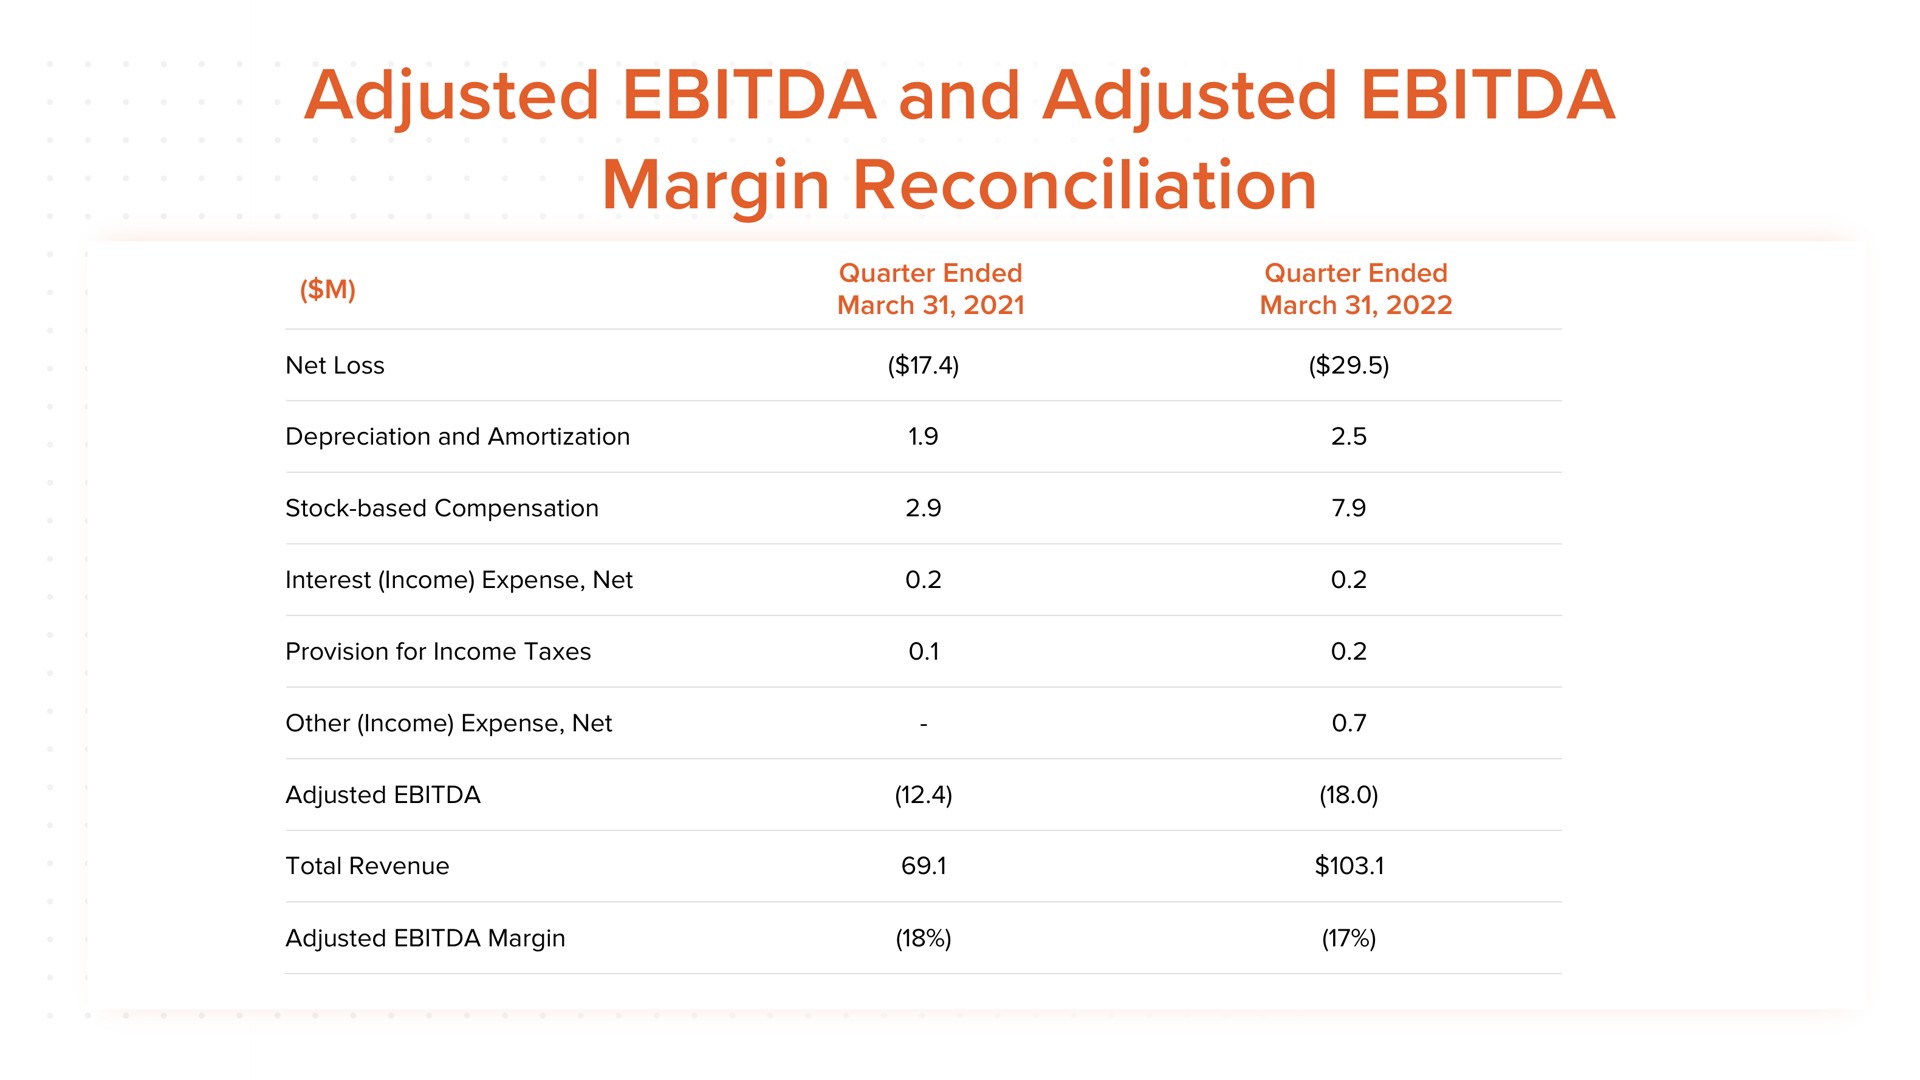 adjusted and adjusted margin reconciliation | ACV Auctions